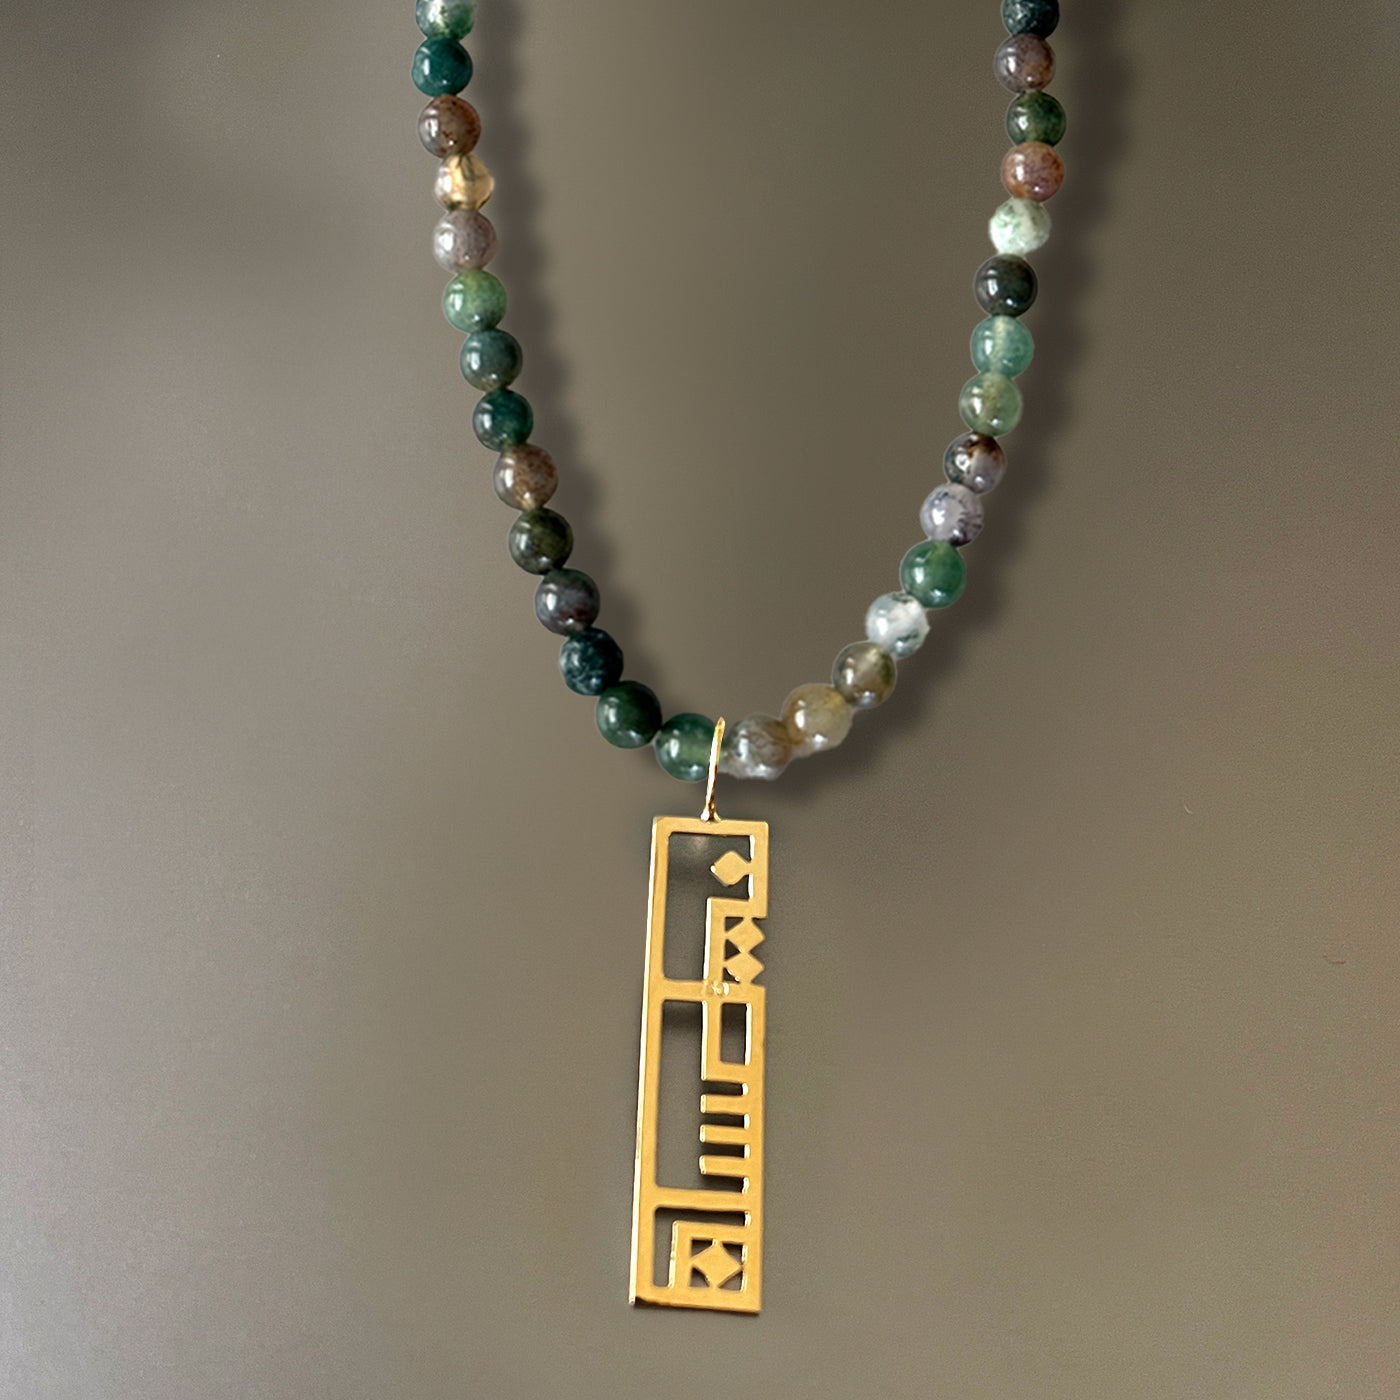 Palestine Name Beads Necklace